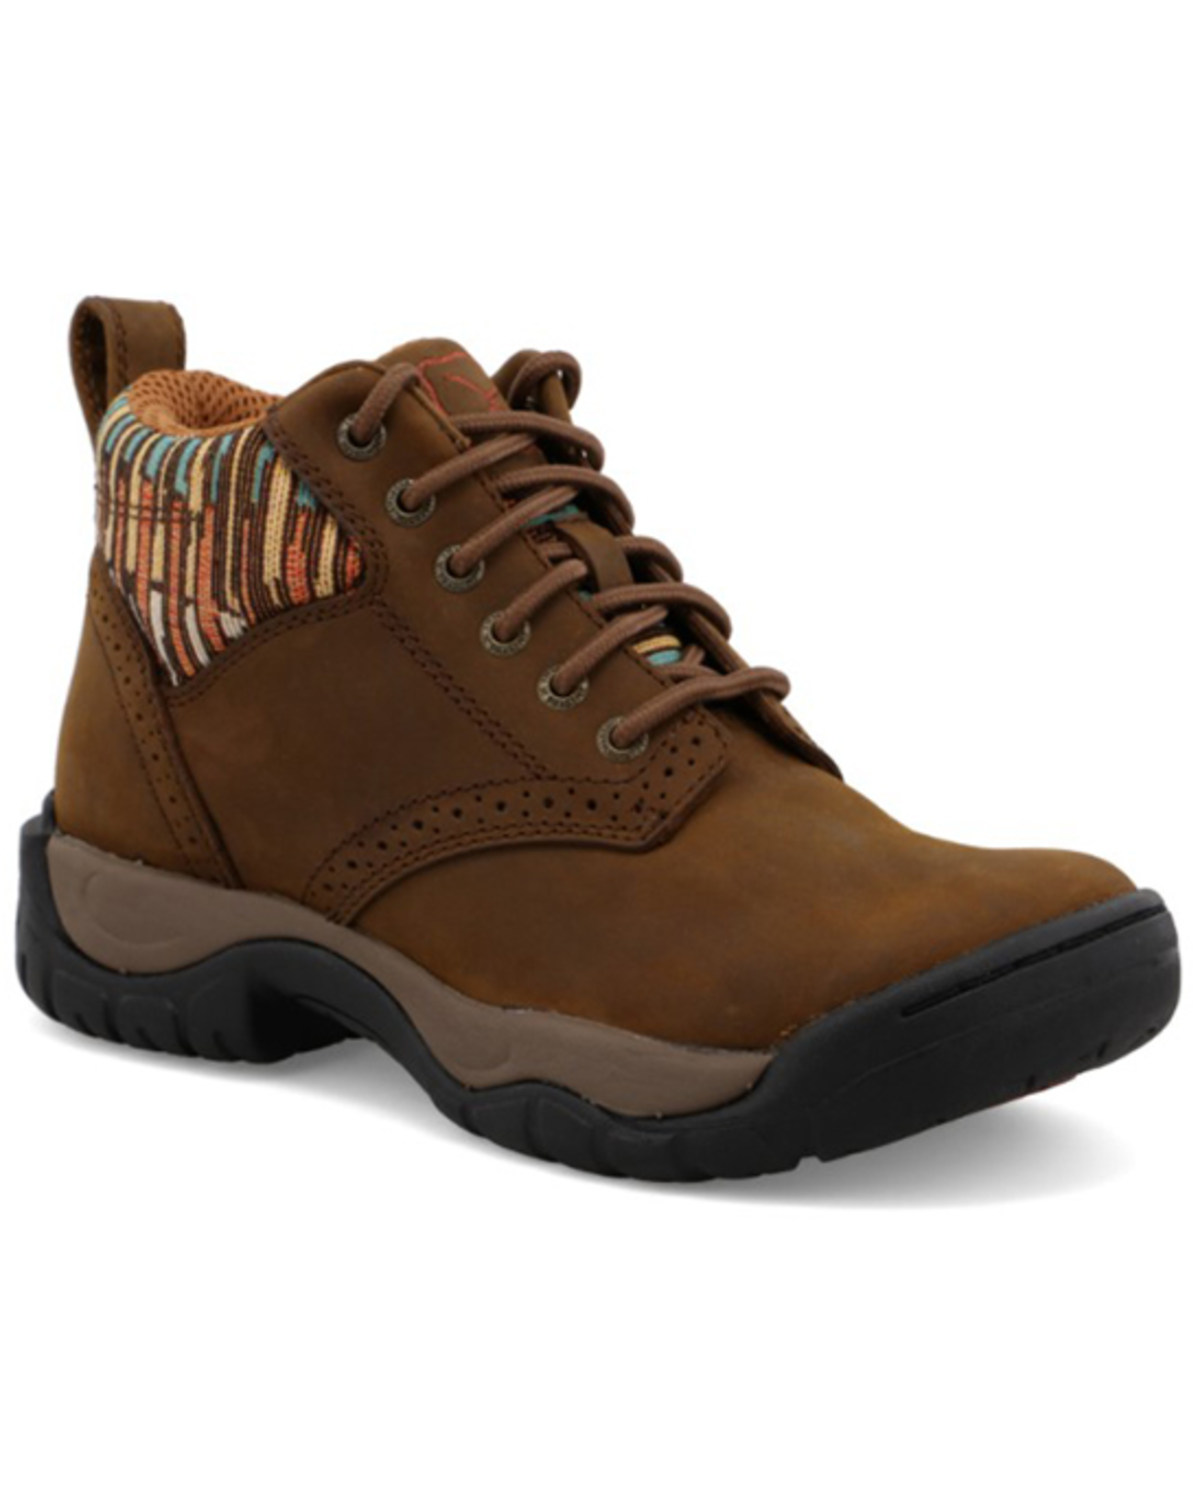 Twisted X Women's 4" All Around Lace-Up Hiking Multi Brown Work Boot - Round Toe